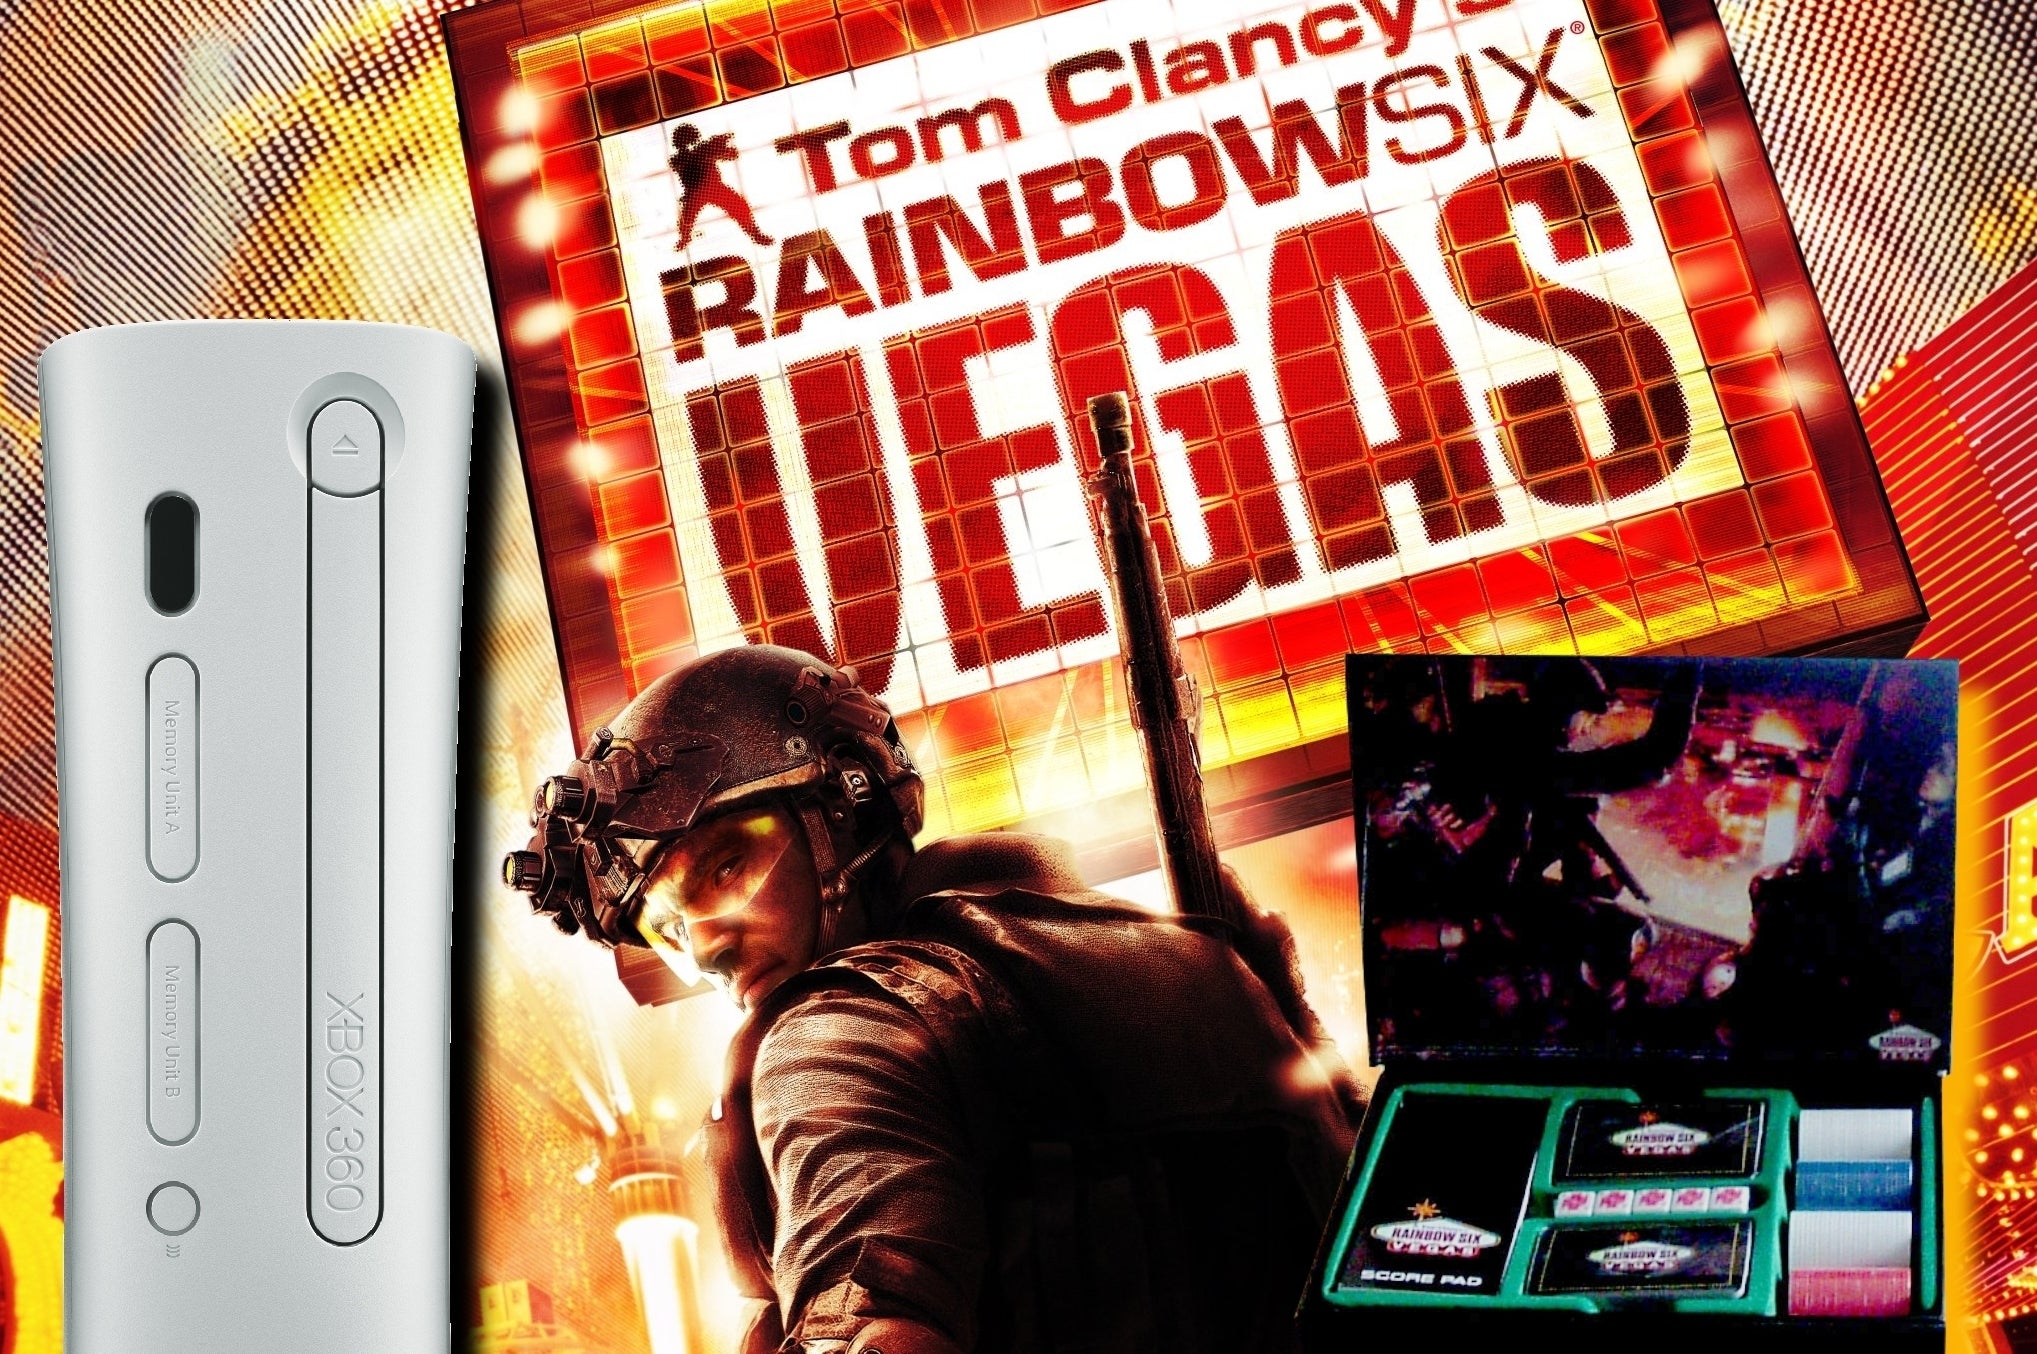 Image for Games with Gold: Rainbow Six Vegas now available